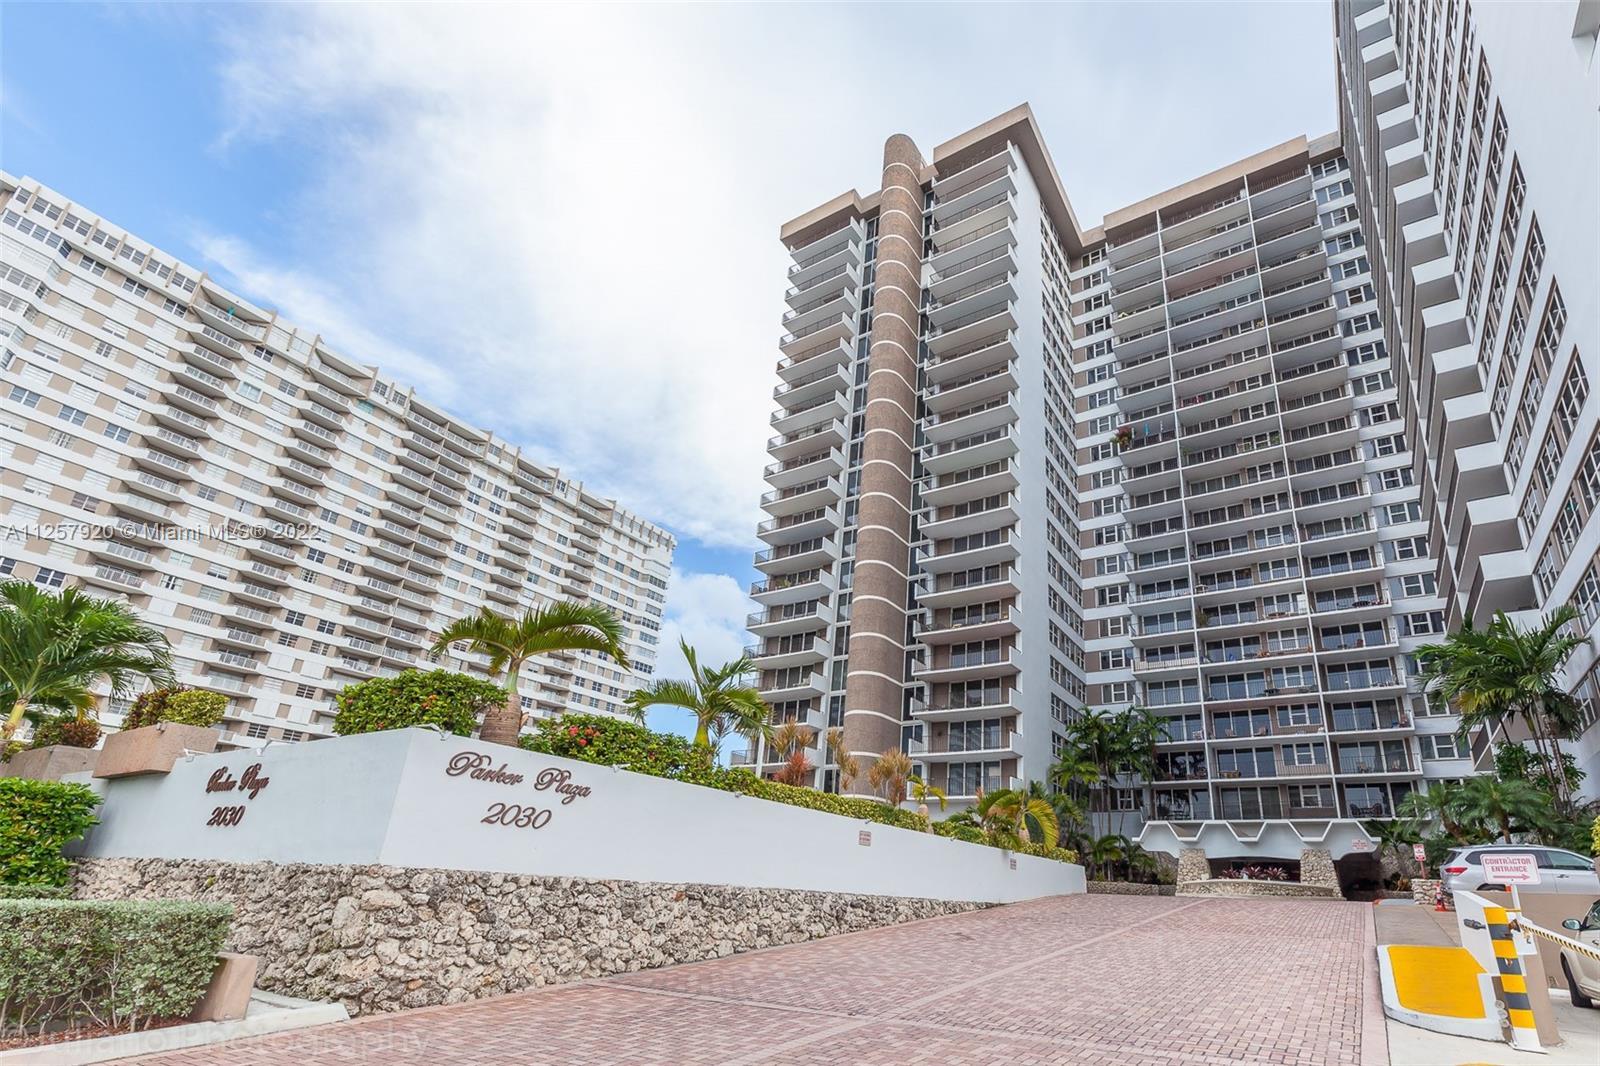 LOVELY UNIT WITH OCEAN VIEW FROM THE TERRACE. UPDATED BATHROOMS AND KITCHEN. NEW FLOORING IN LIVING 